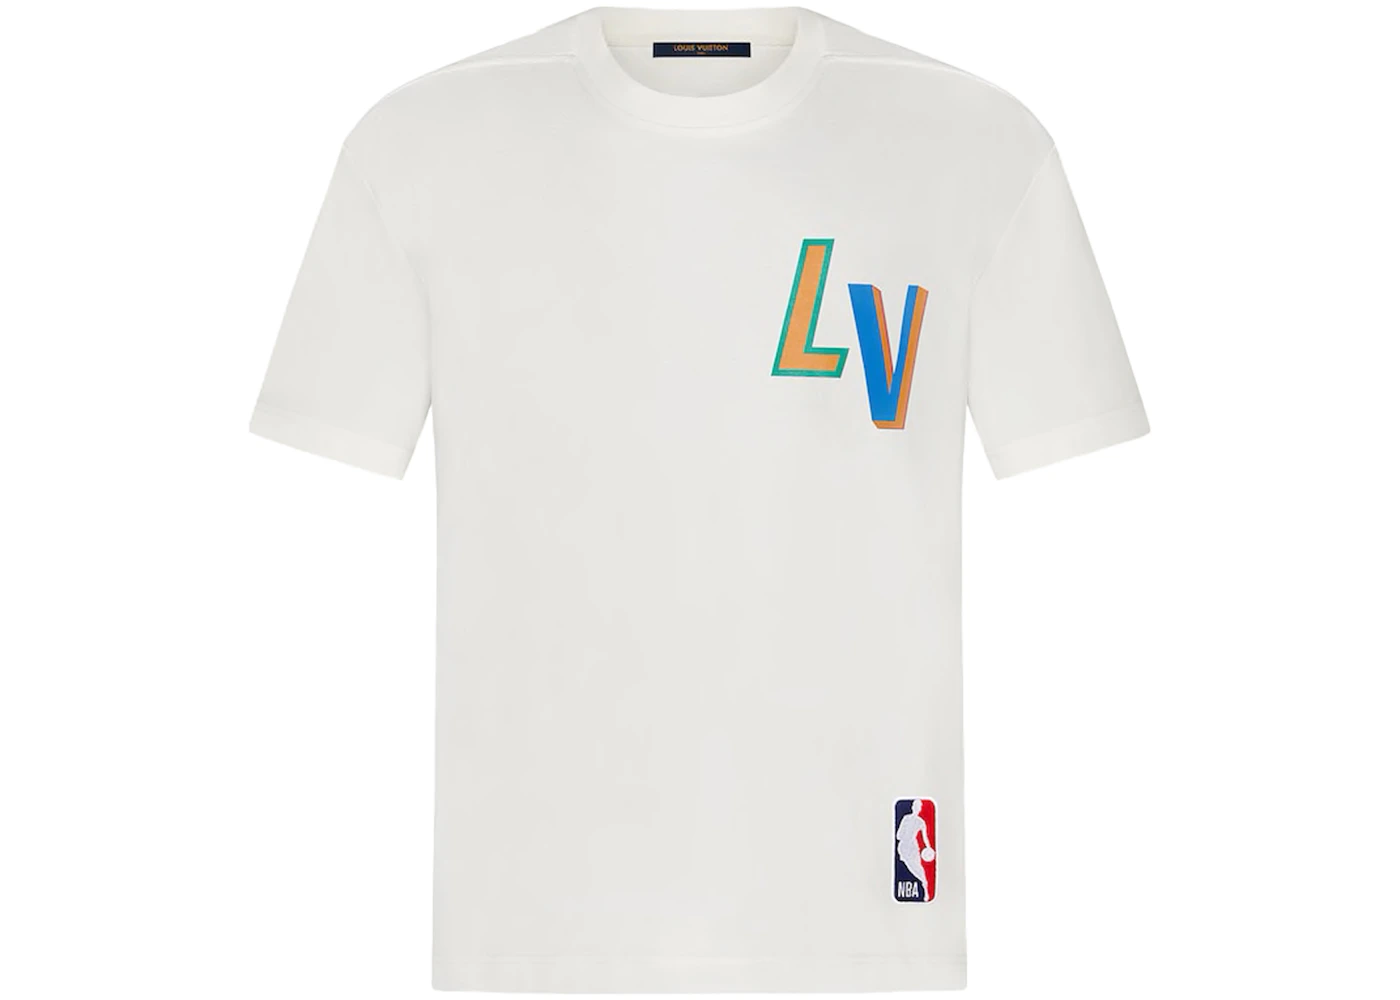 At læse dynamisk Gøre mit bedste Louis Vuitton x NBA Basketball Short-Sleeved T-shirt White - SS21 - US